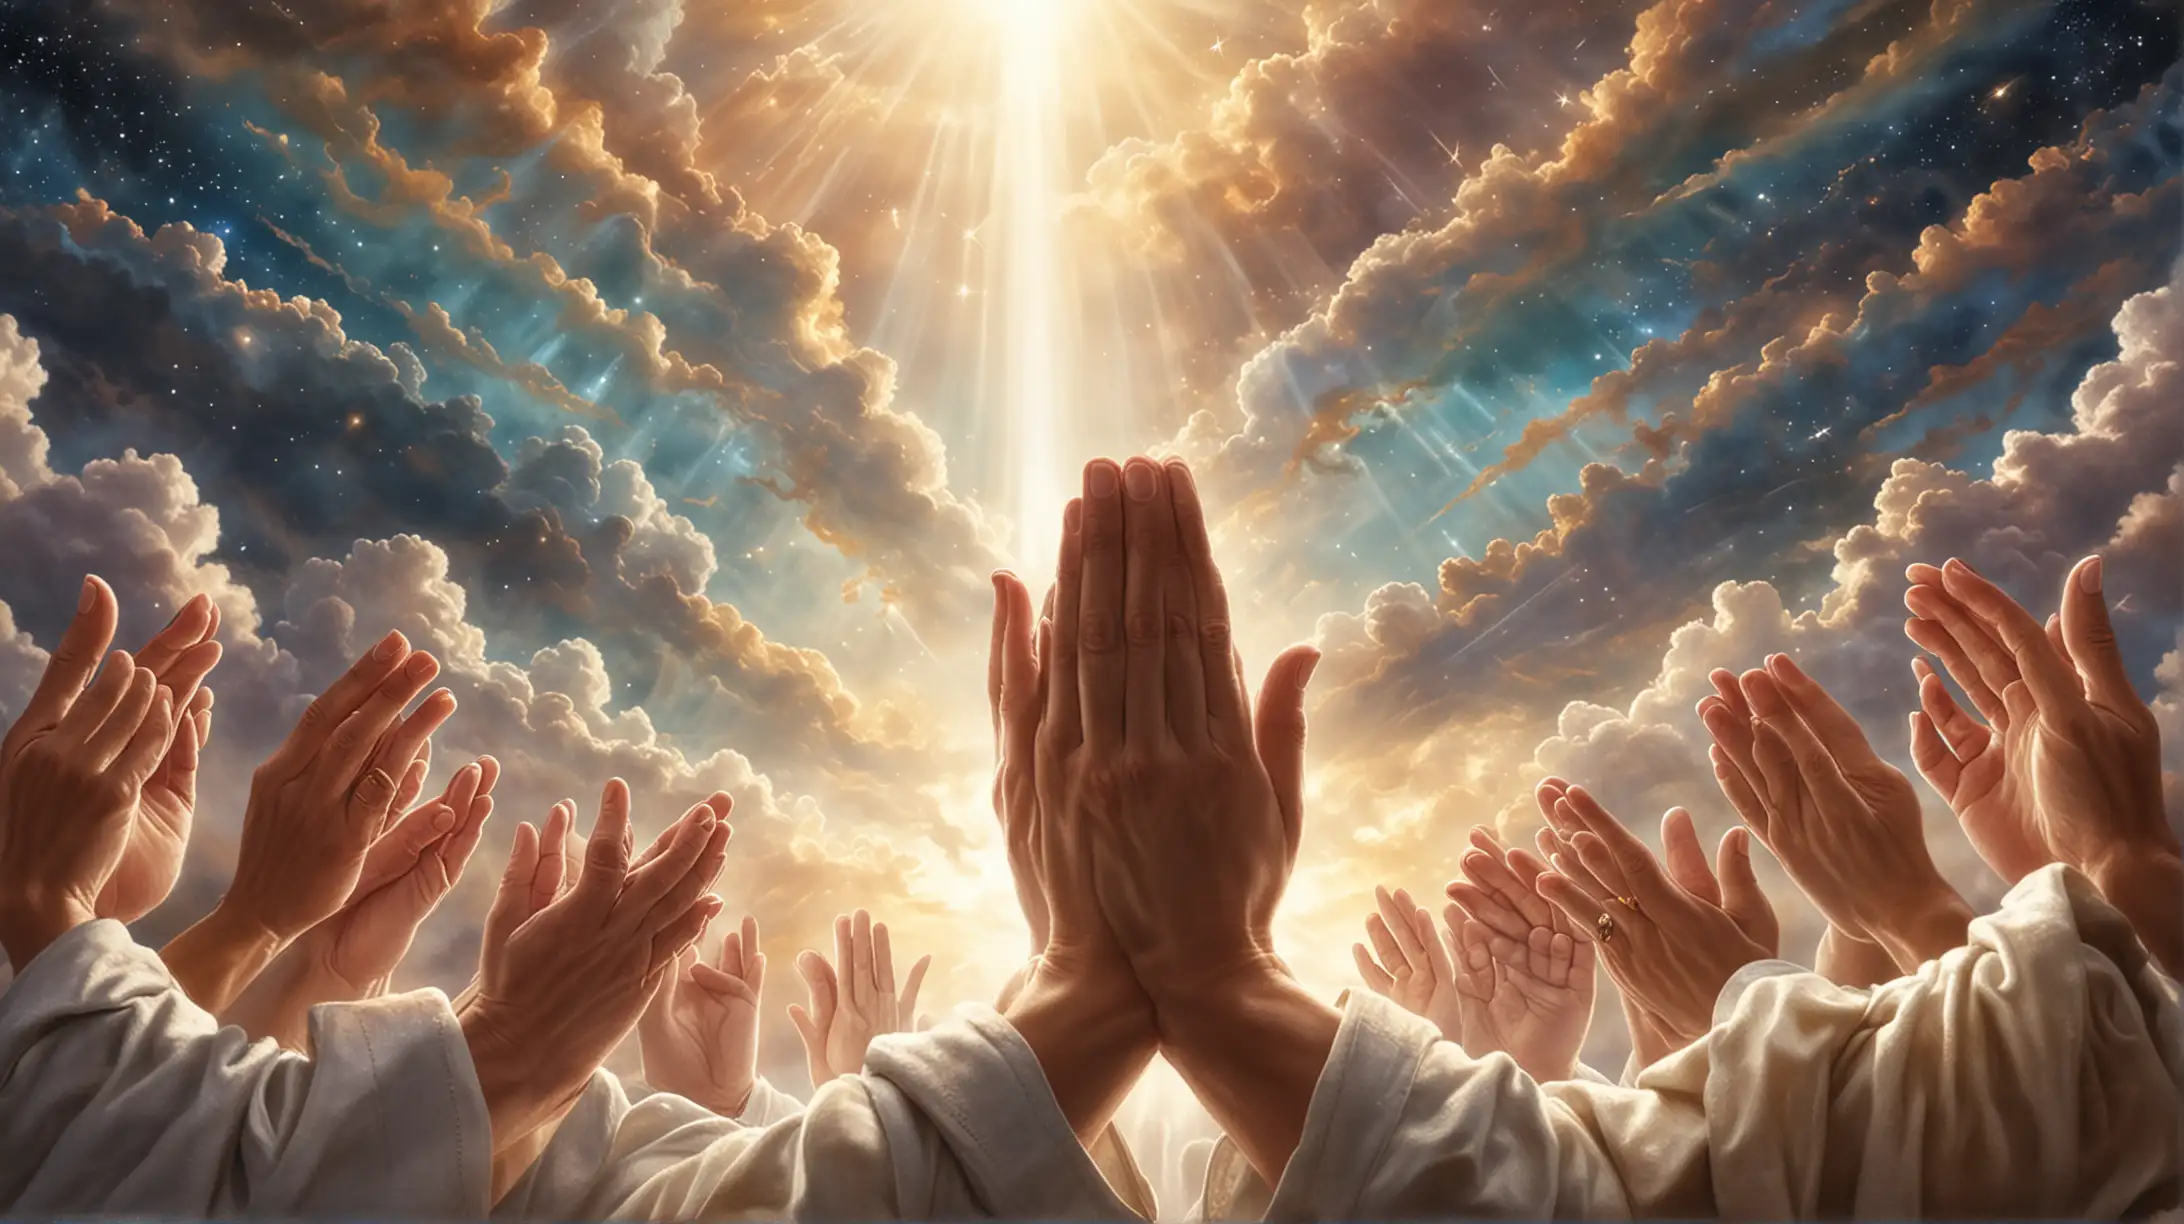 Hands Clasped in Prayer Reaching Skyward for Divine Connection